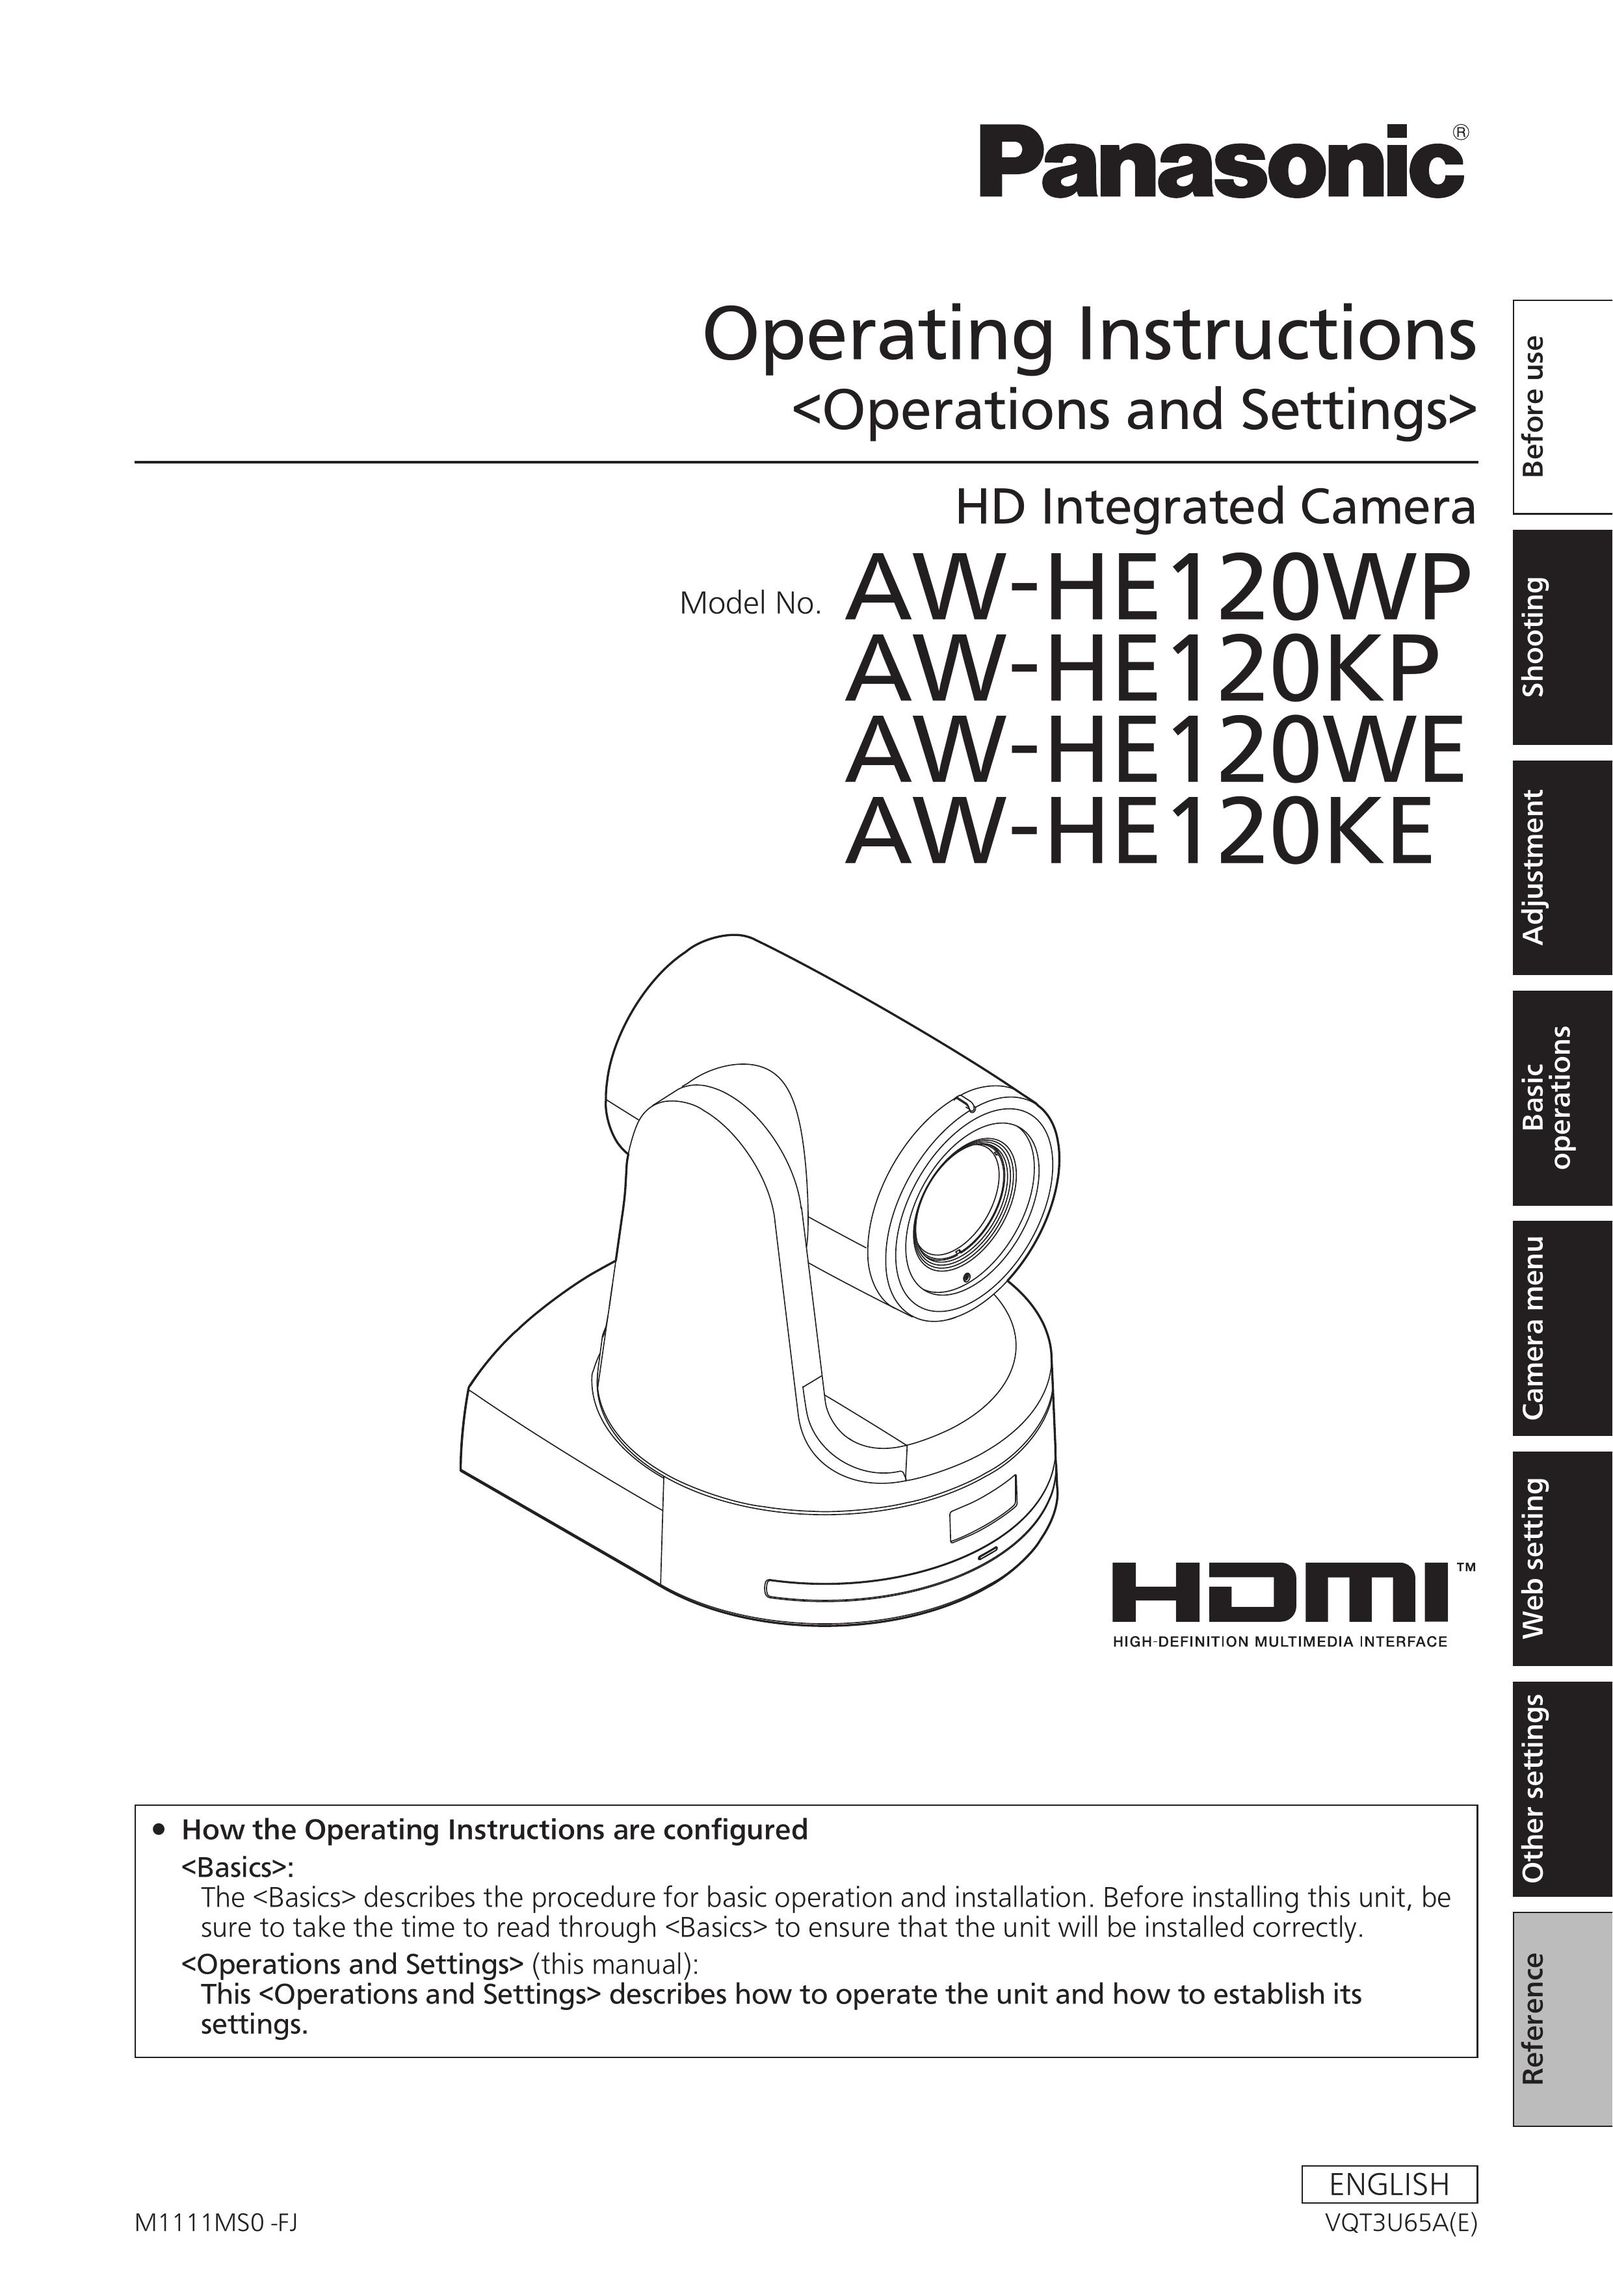 Panasonic AW-RP50 Home Security System User Manual